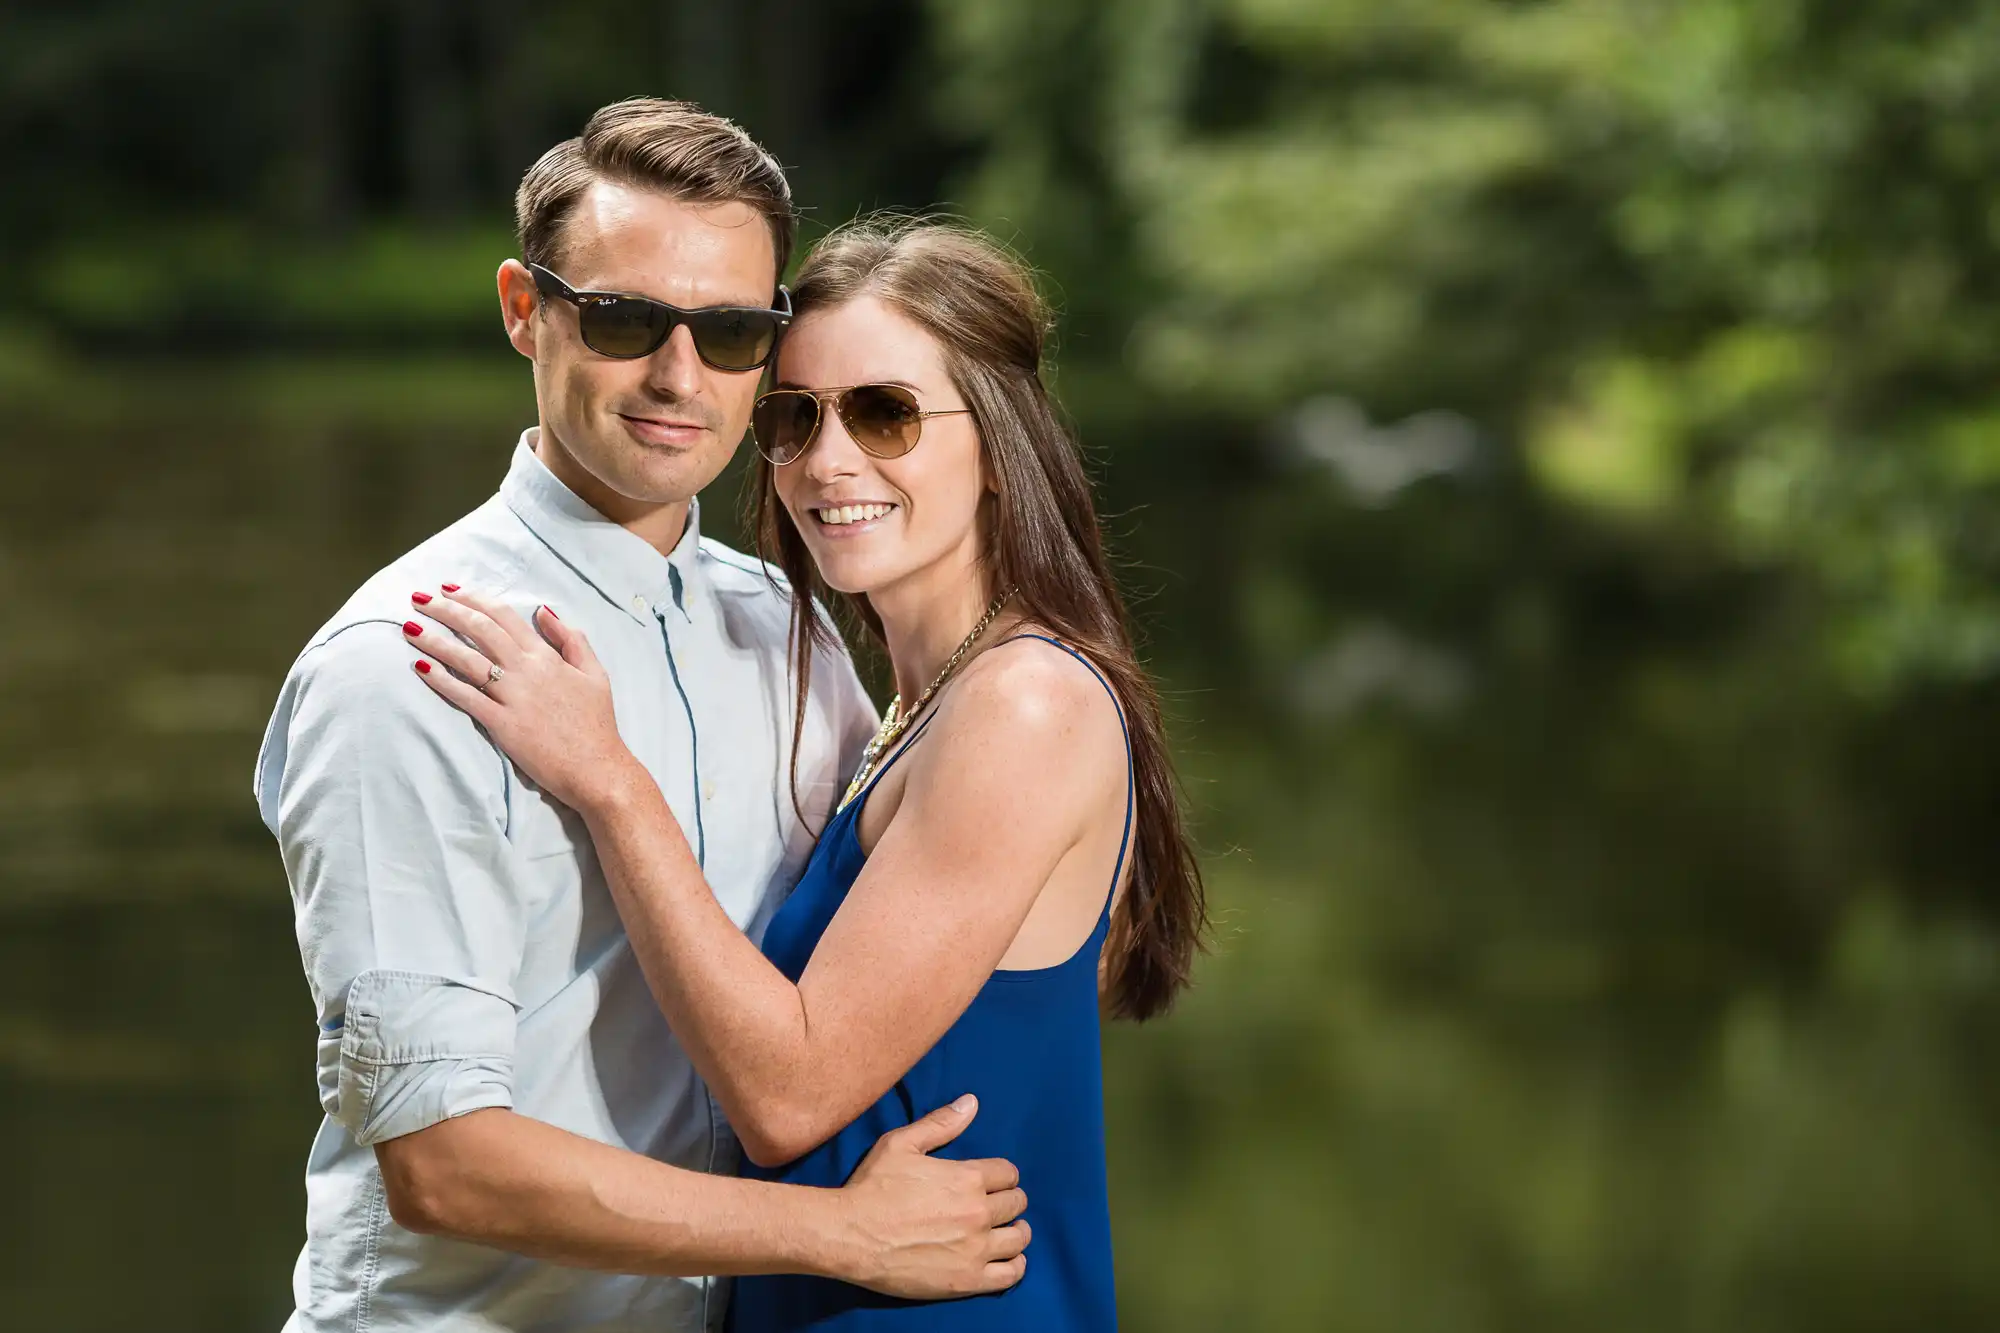 A couple embracing outdoors by a river, with the man wearing sunglasses and a white shirt, and the woman in a blue dress smiling at the camera.